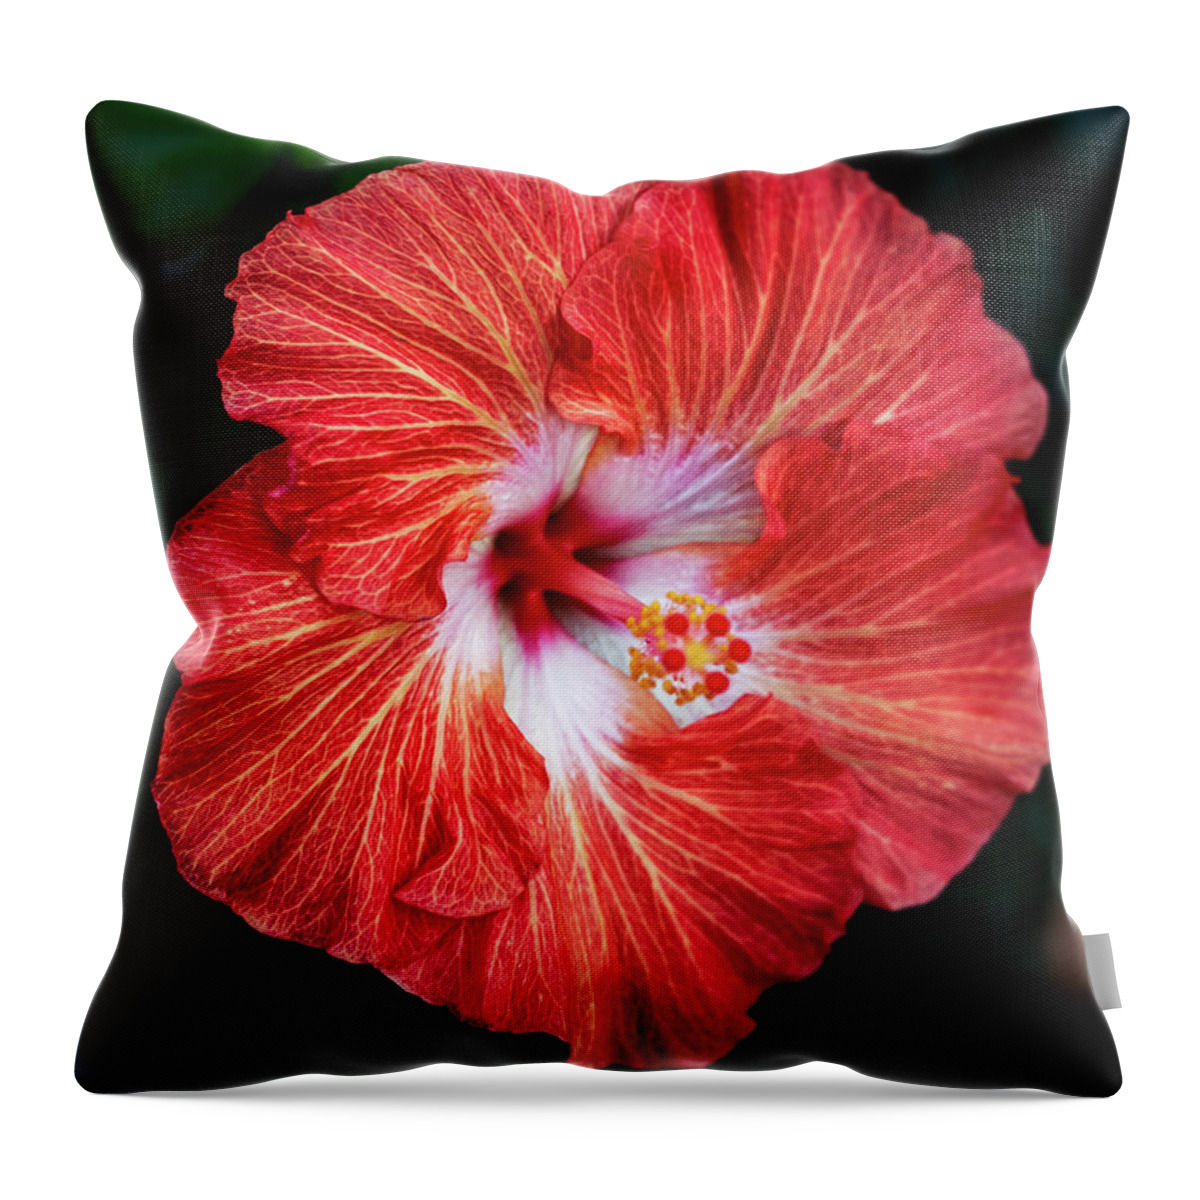 Hibiscus Throw Pillow featuring the photograph Hibiscus by Pamela S Eaton-Ford